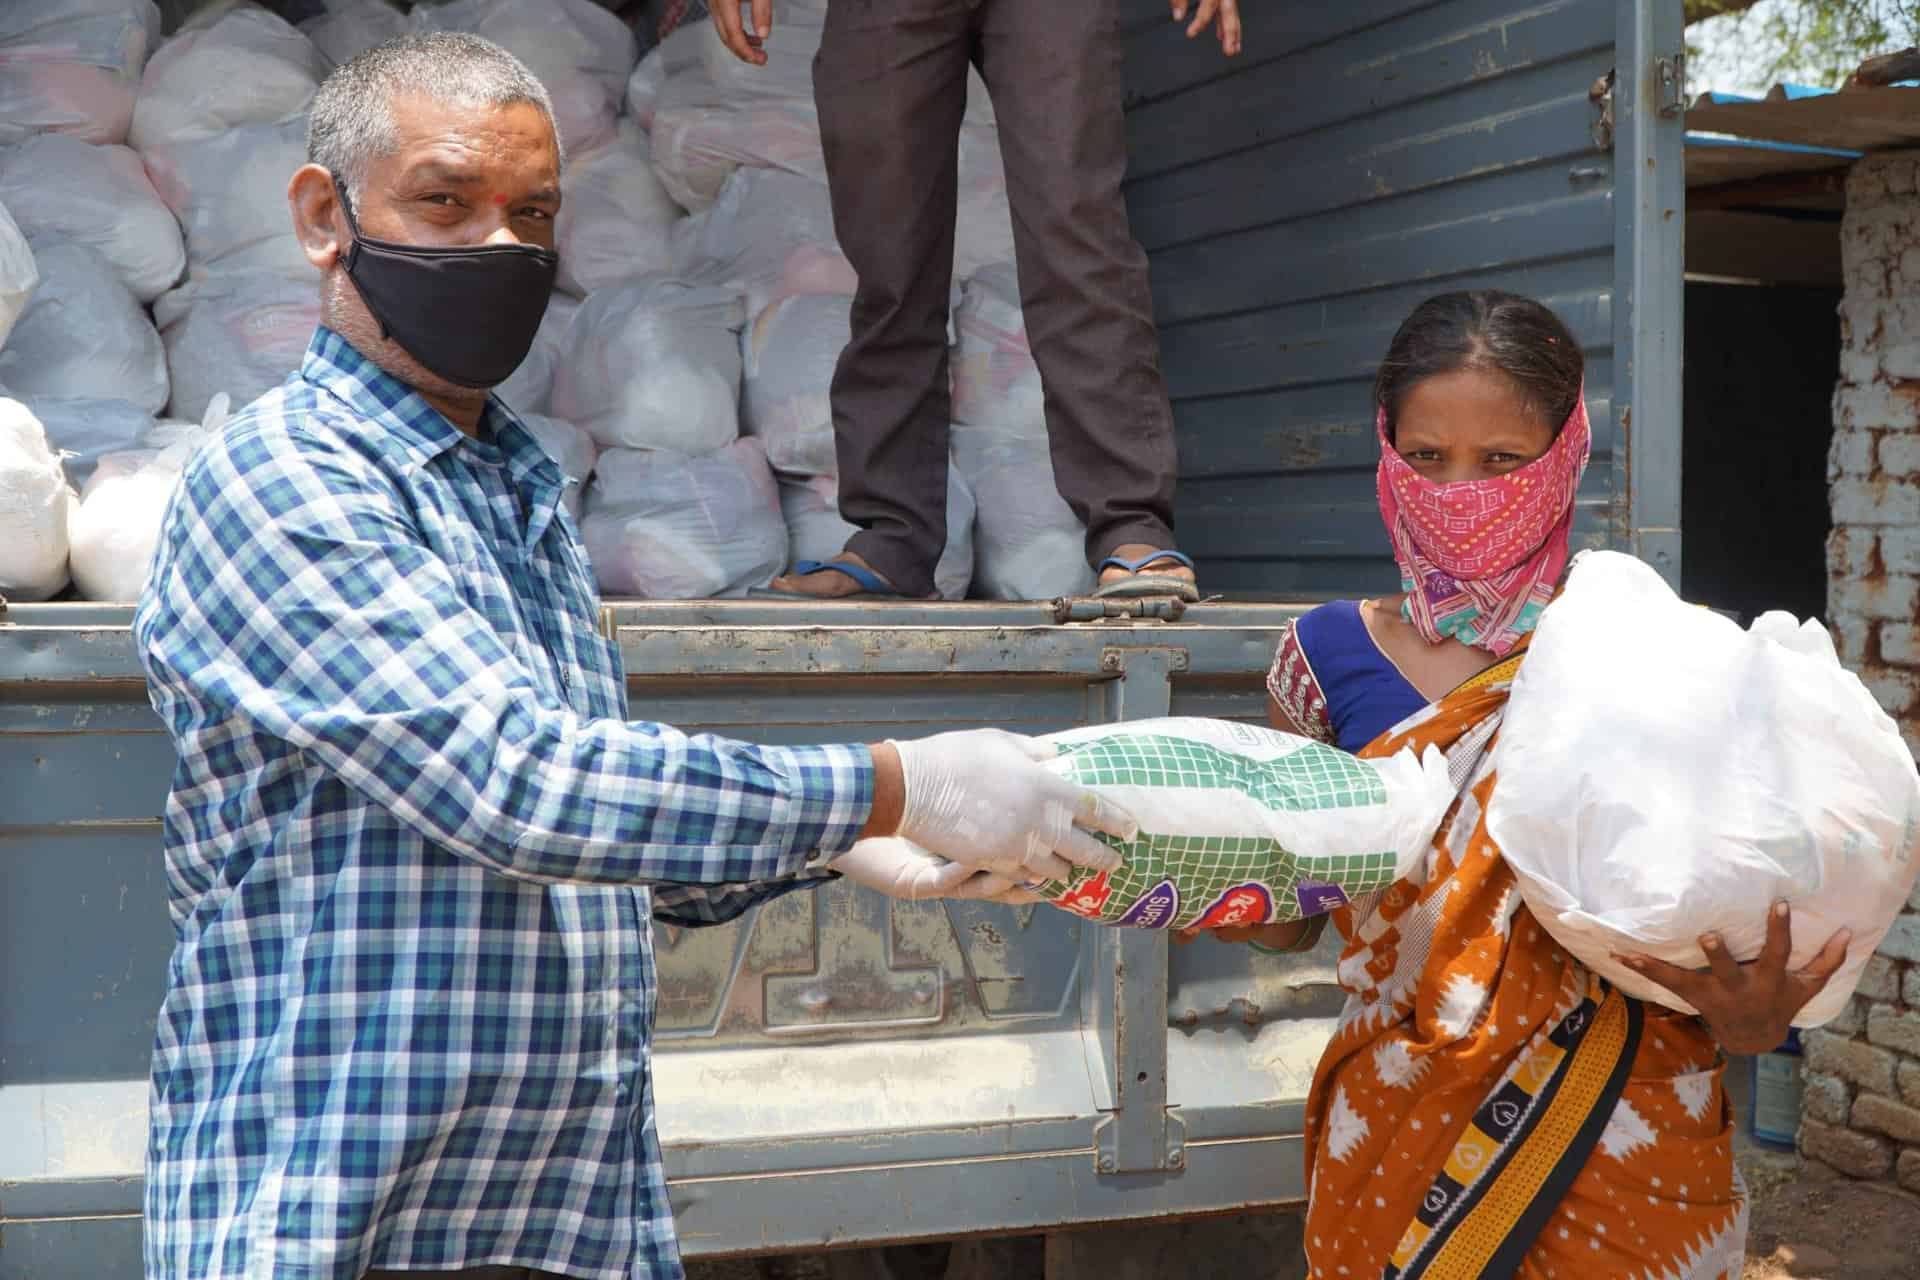 In India, Fondation SNCF is helping us to support the population in the face of the impact of the COVID-19 pandemic